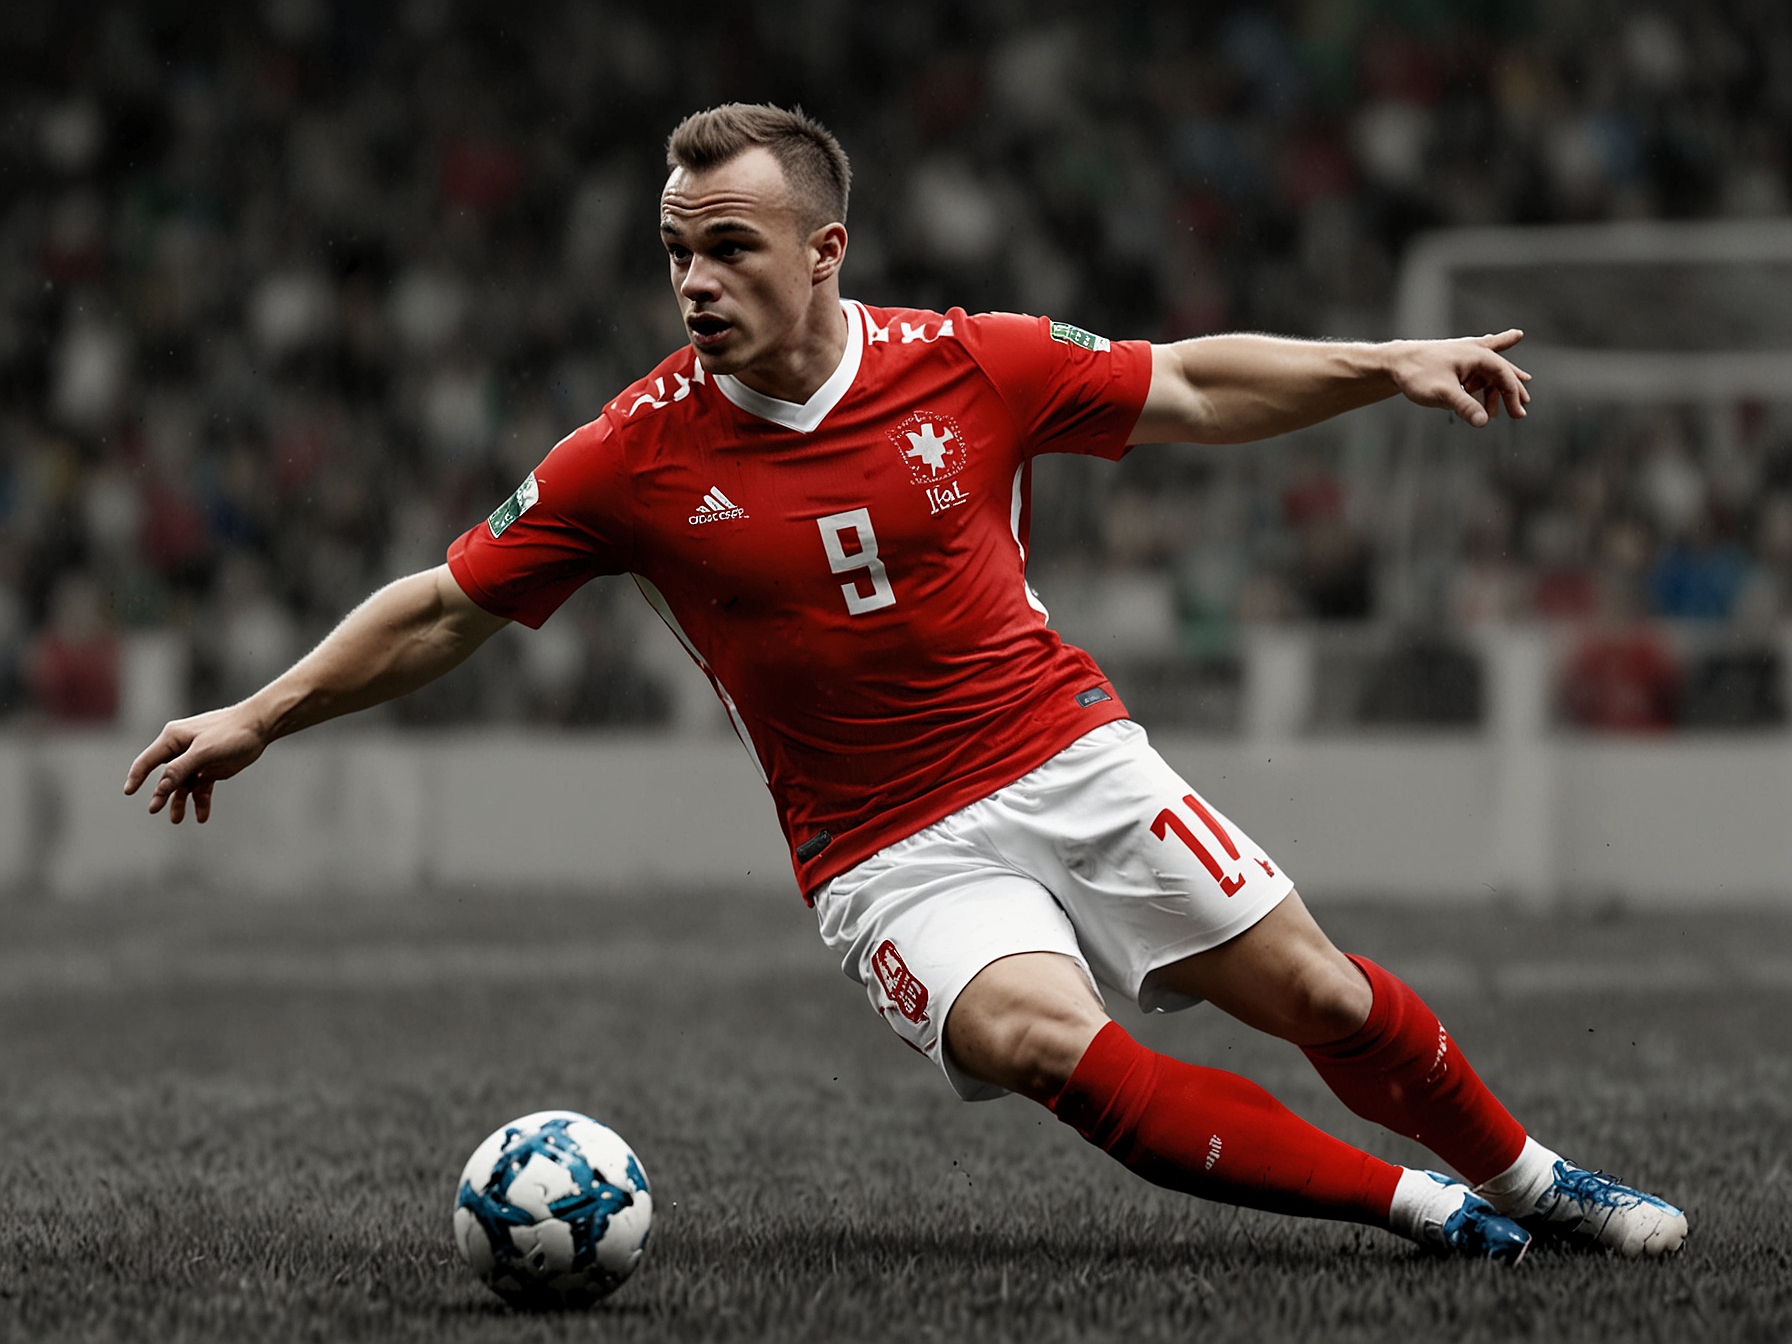 Swiss star Xherdan Shaqiri in action against Italy's formidable defense, representing the clash of experienced players and strategic maneuvering expected in this marquee European Championship match.